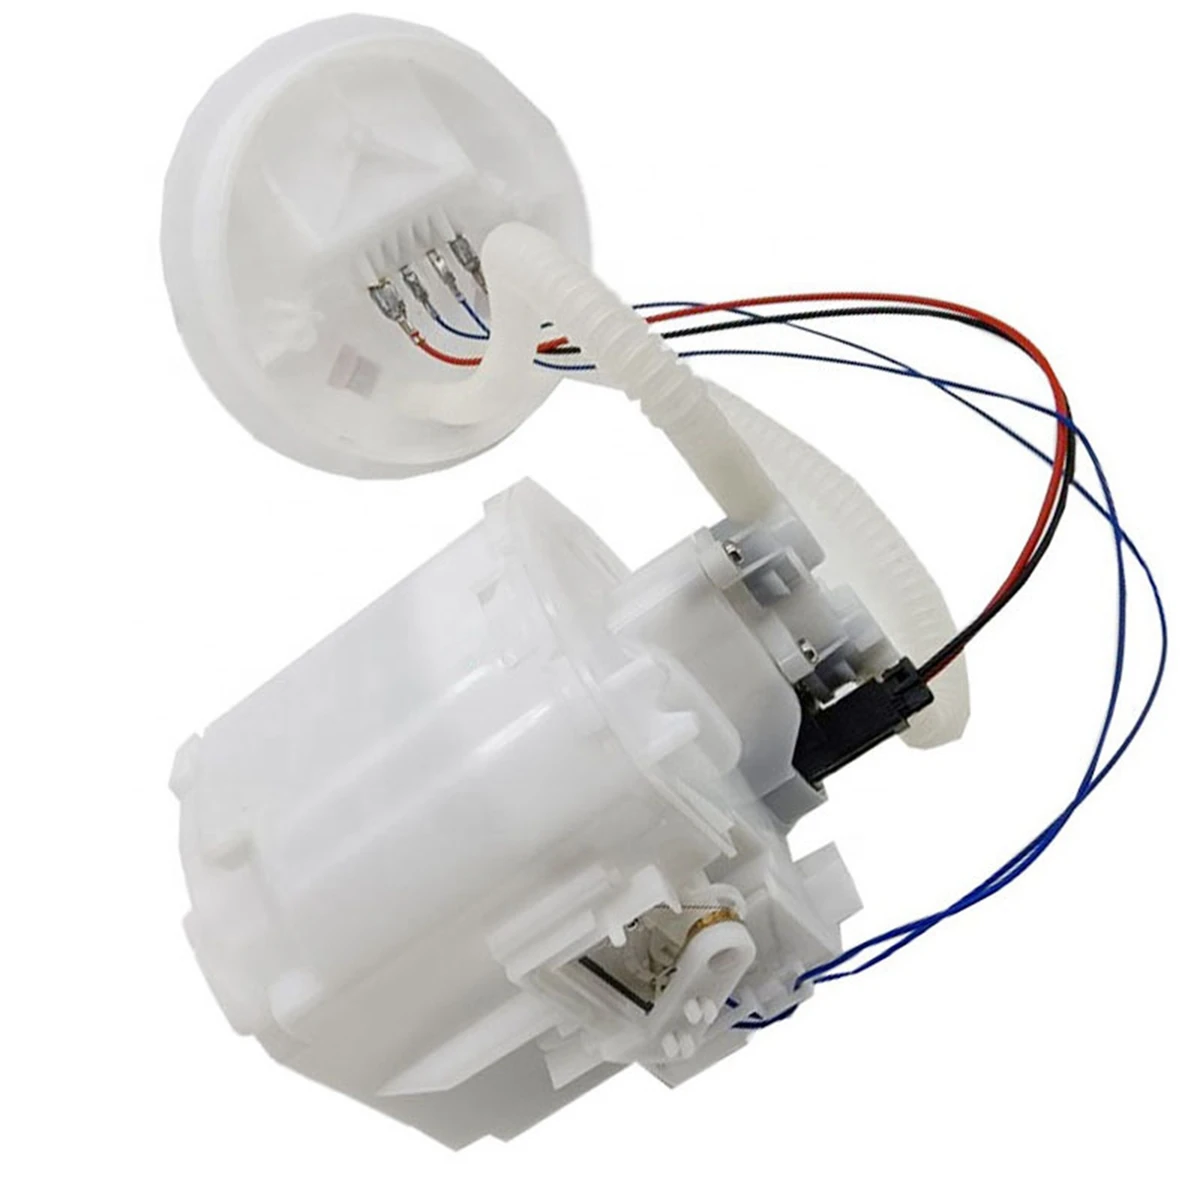 

1388671 Car Fuel Pump Module Assembly for Ford Focus 98-04 Transit Connect 05-13 97FB3H307 Engine Fuel Tank Pump